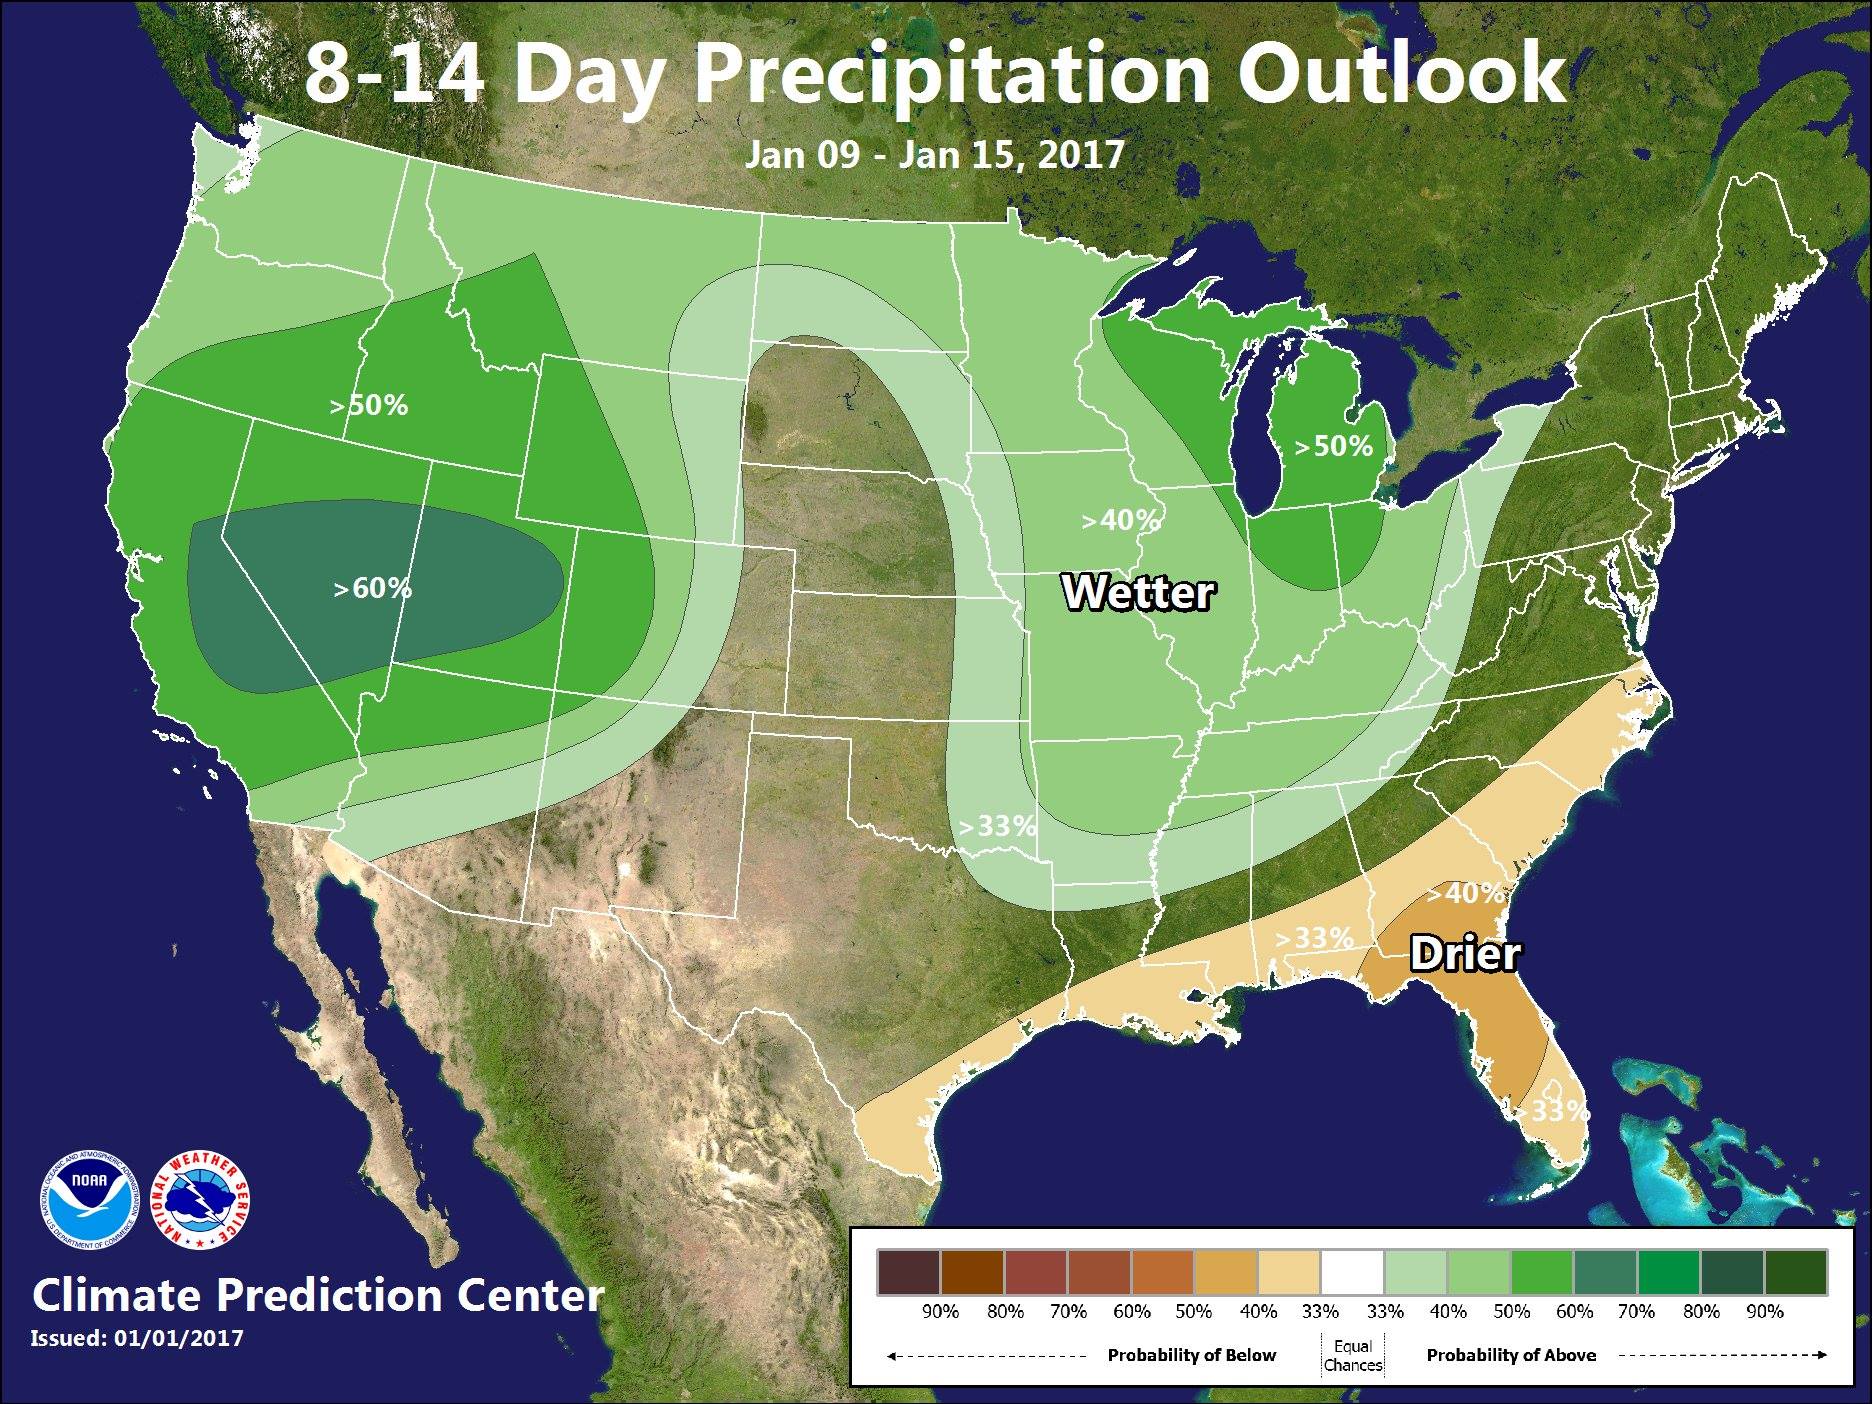 8-14 day outlook looking wet for CO.  image:  noaa, yesterday